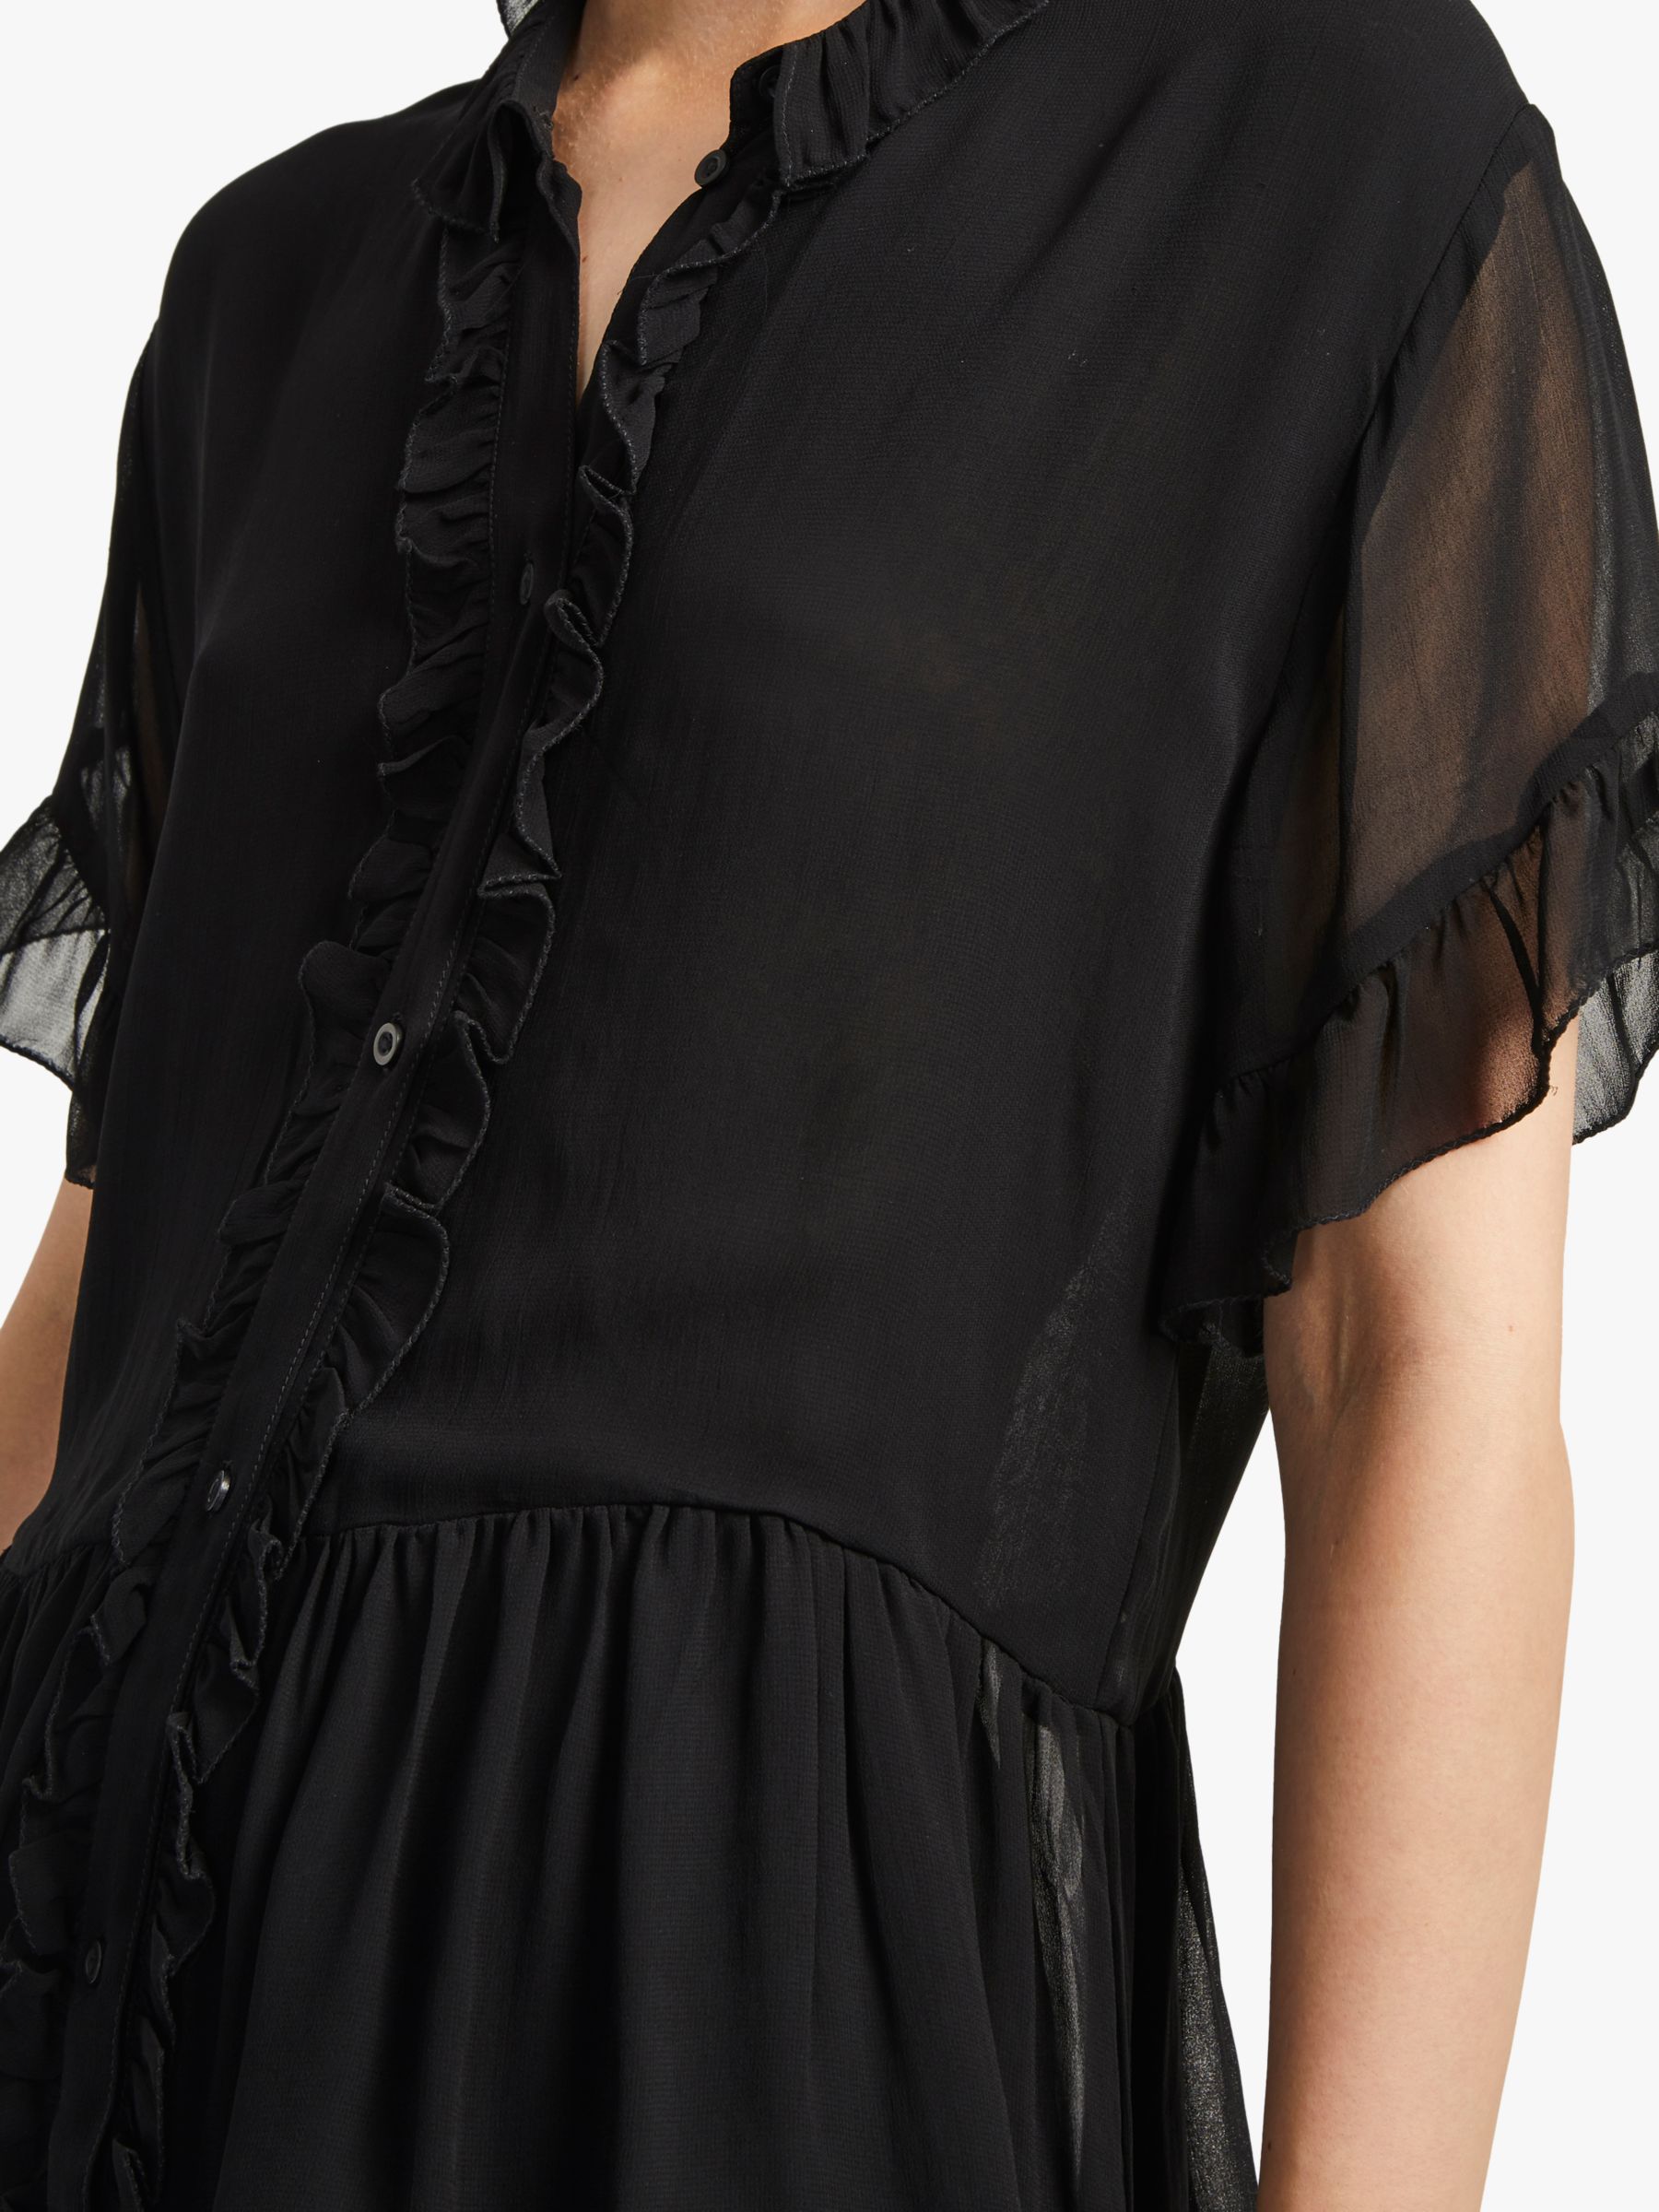 French Connection Clandre Ruffle Sleeve Blouse, Black at John Lewis ...